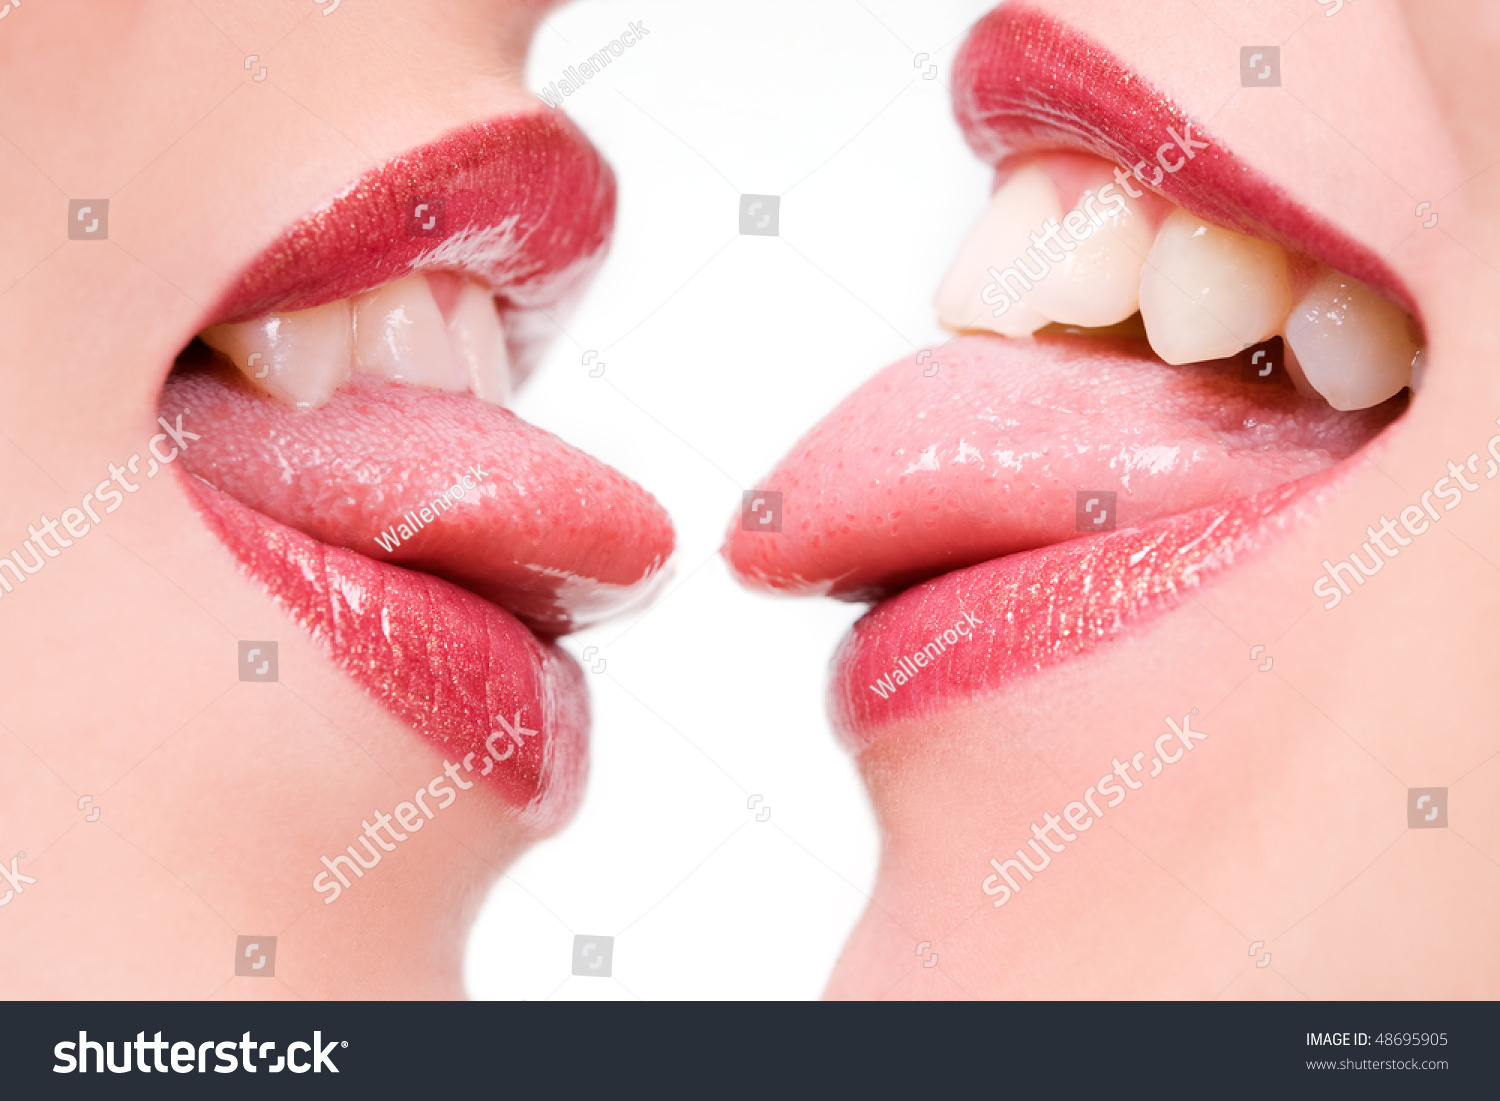 Images tongues kissing with Category:Females tongue